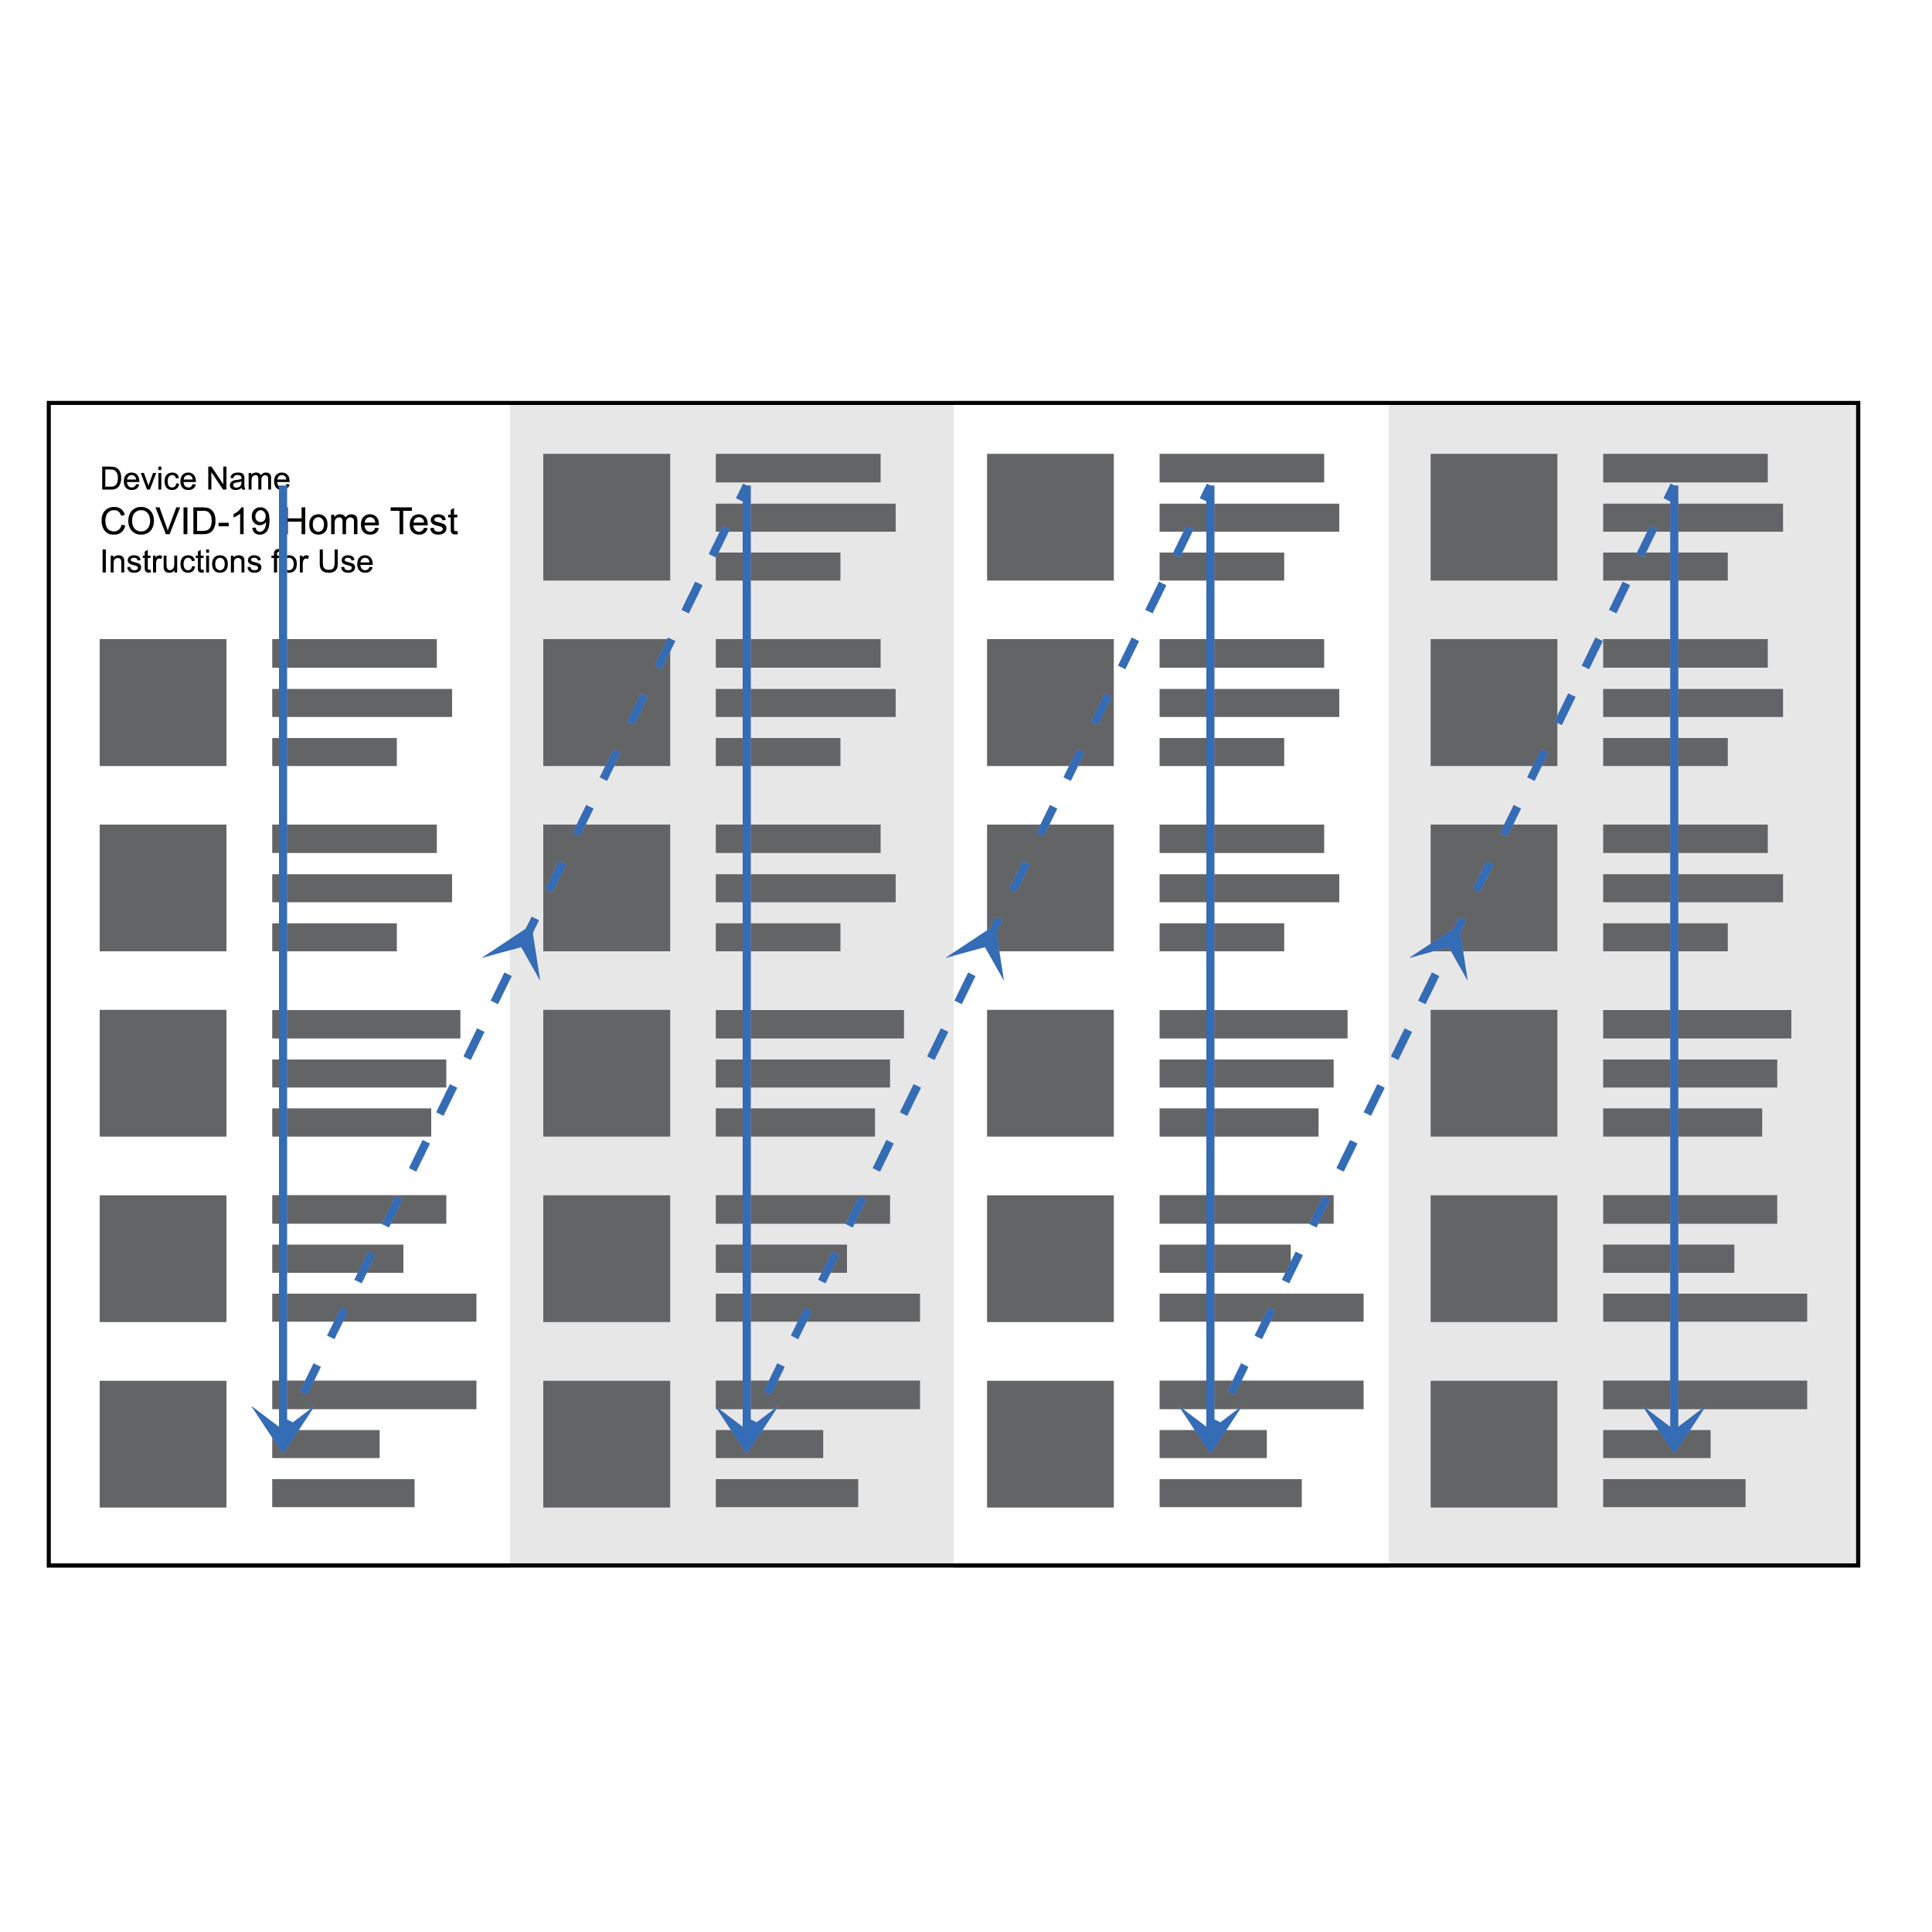 Rectangular document with blocks of images and text stacked in four even and aligned columns. Blue arrows point down and up to the next column, indicating an easy reading flow.